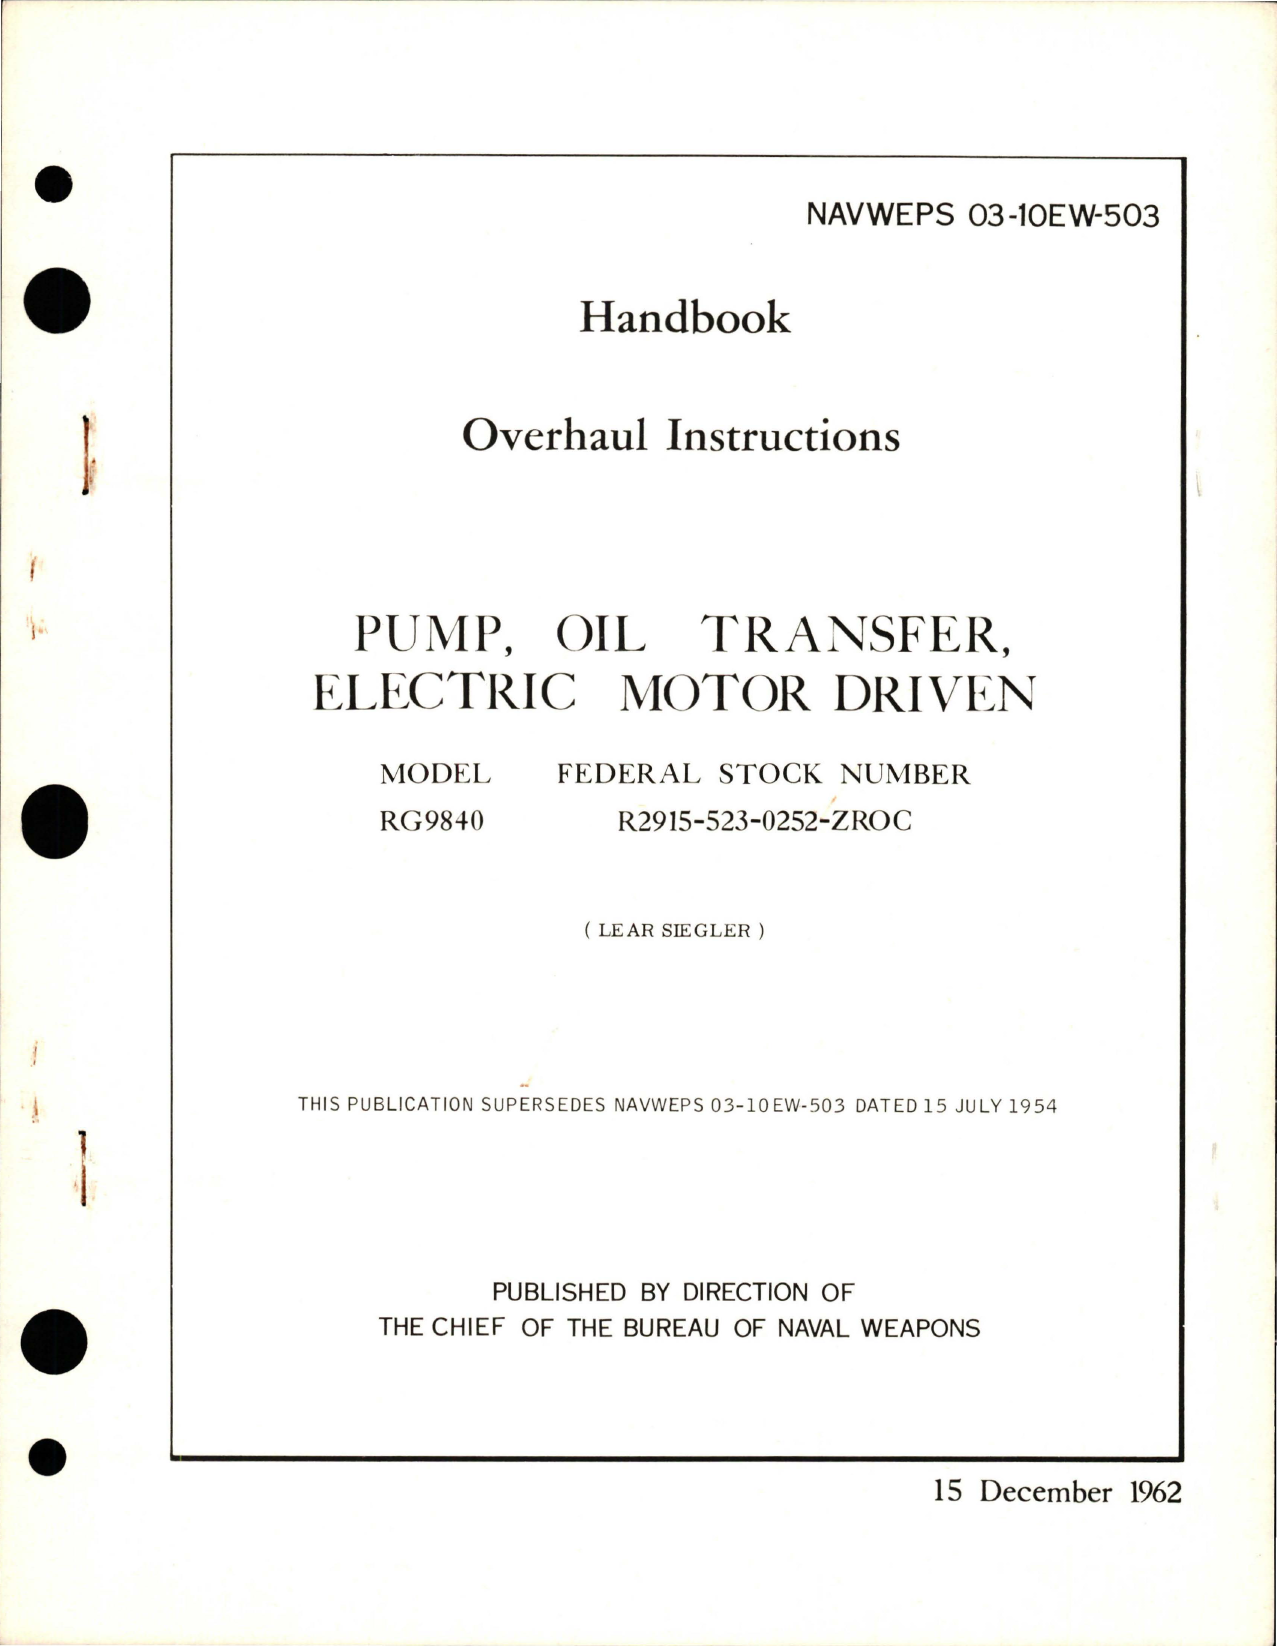 Sample page 1 from AirCorps Library document: Overhaul Instructions for Oil Transfer Electric Motor Driven Pump - Model RG9840 